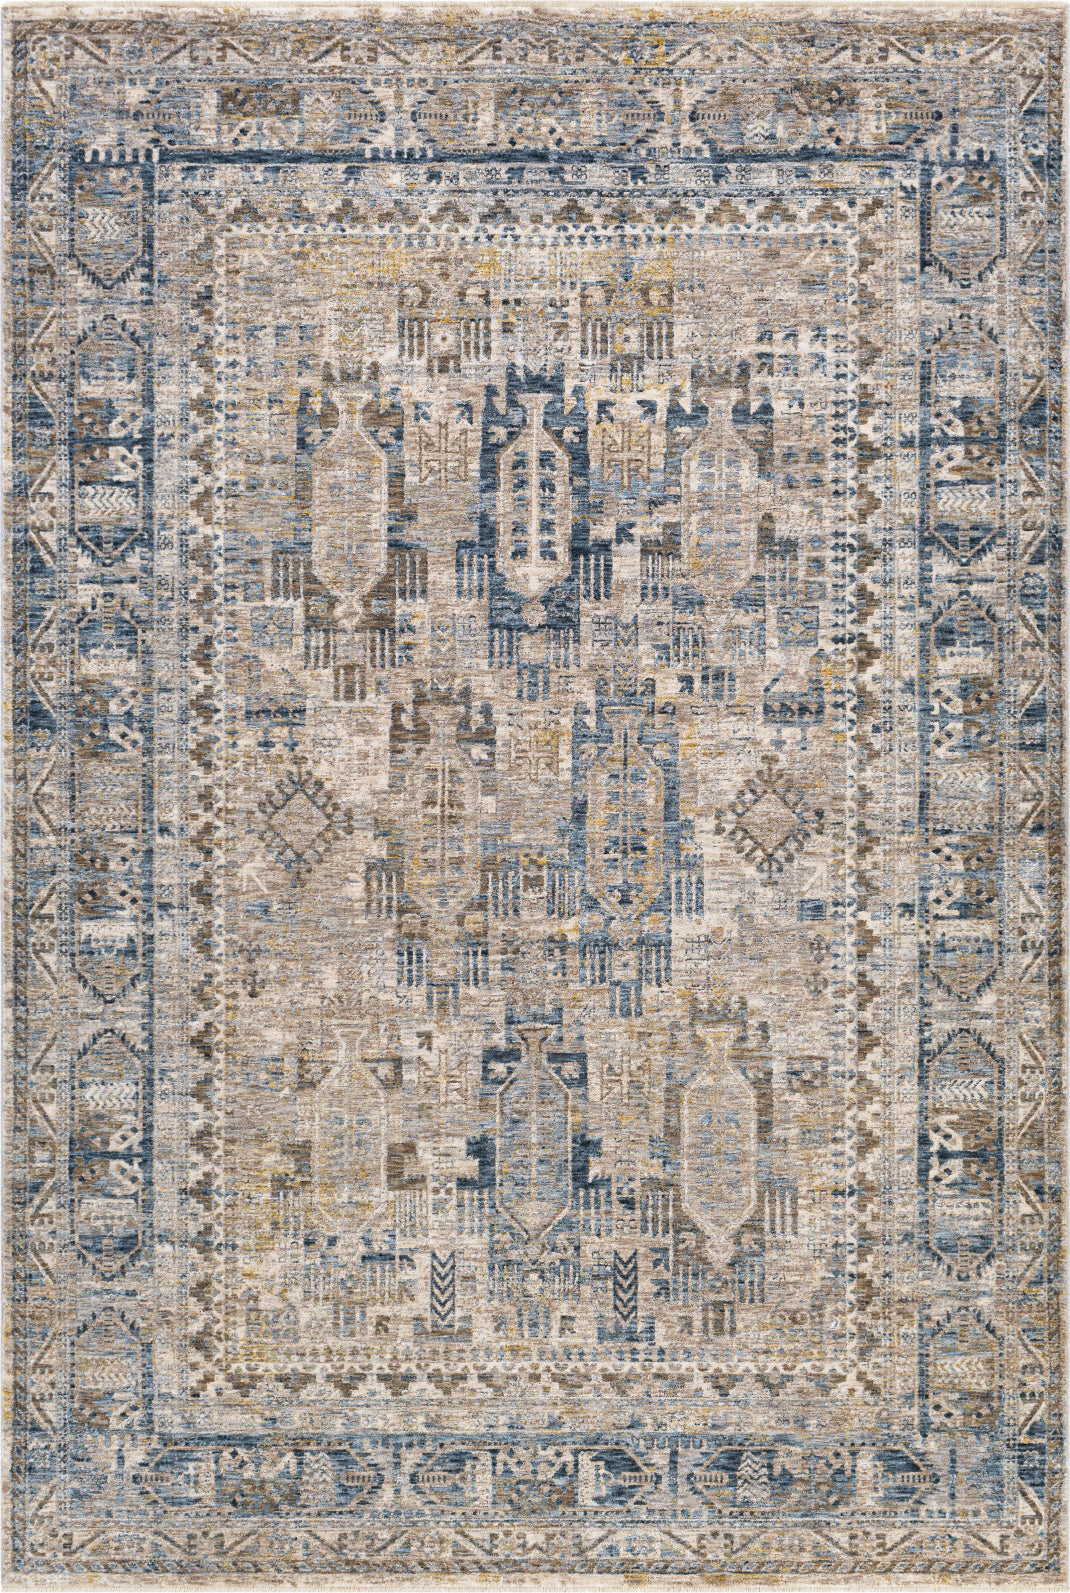 Surya Mirabel MBE-2302 Area Rug by Artistic Weavers Main Image 6'7''x9'6'' Size 